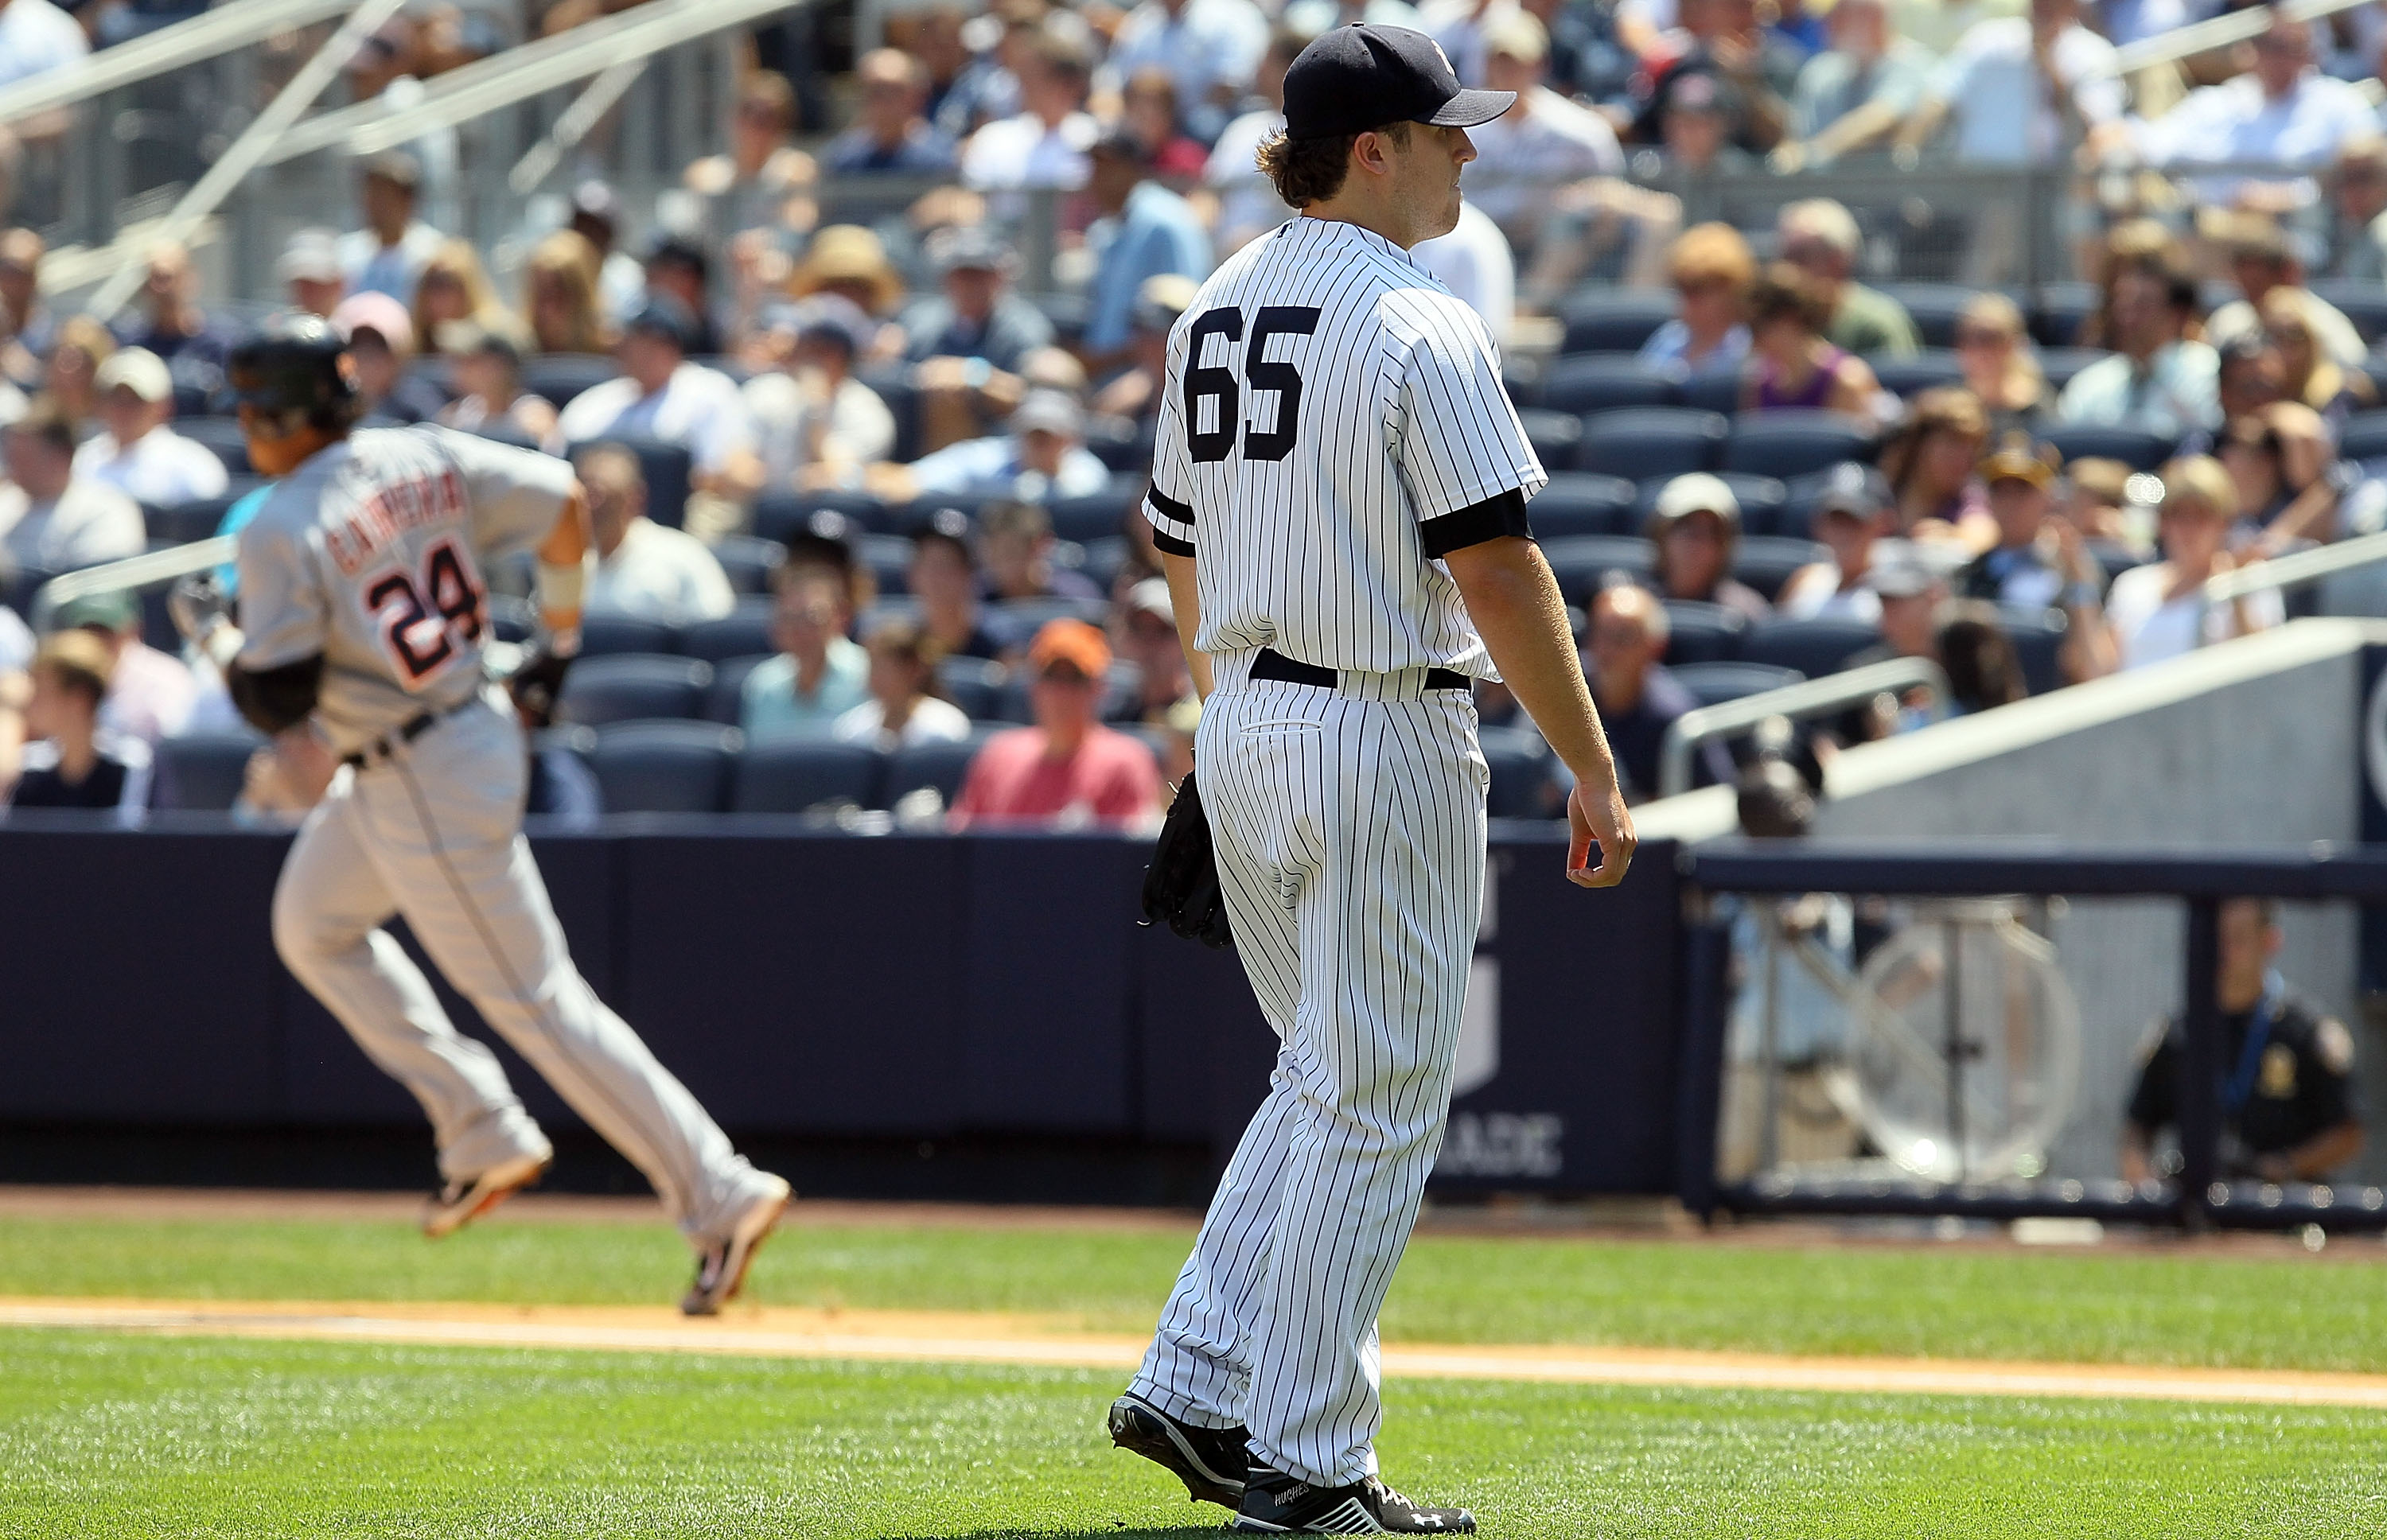 NEW YORK - AUGUST 19:  Phil Hughes #65 of the New York Yankees looks on after surrendering a first inning two run home run against Miguel Cabrera #24 of the Detroit Tigers on August 19, 2010 at Yankee Stadium in the Bronx borough of New York City.  (Photo